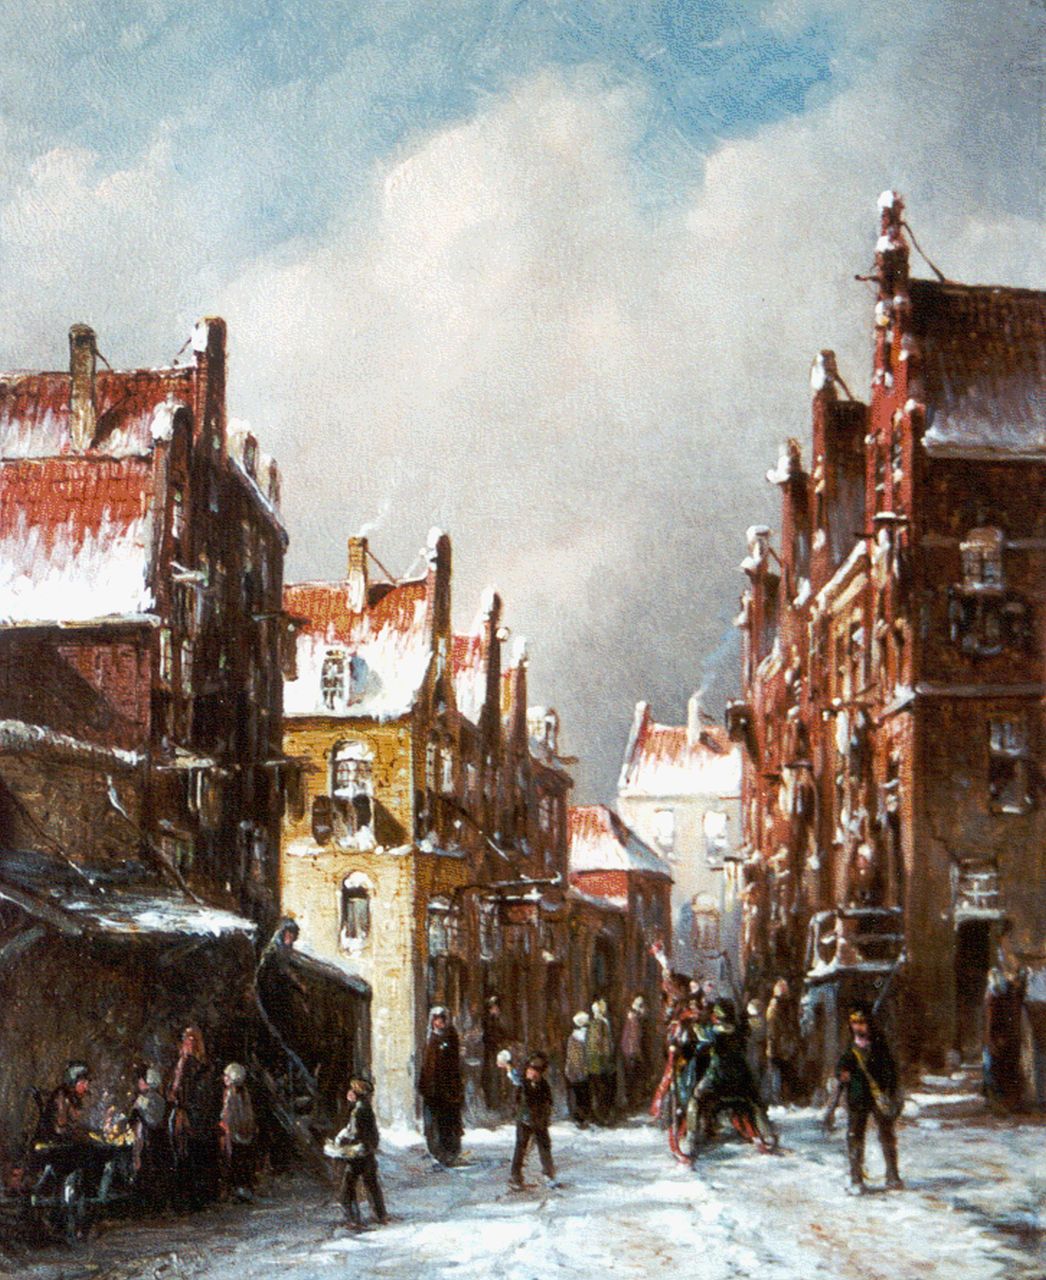 Vertin P.G.  | Petrus Gerardus Vertin, A snow-covered town, oil on panel 21.4 x 17.5 cm, signed l.l. and dated '85